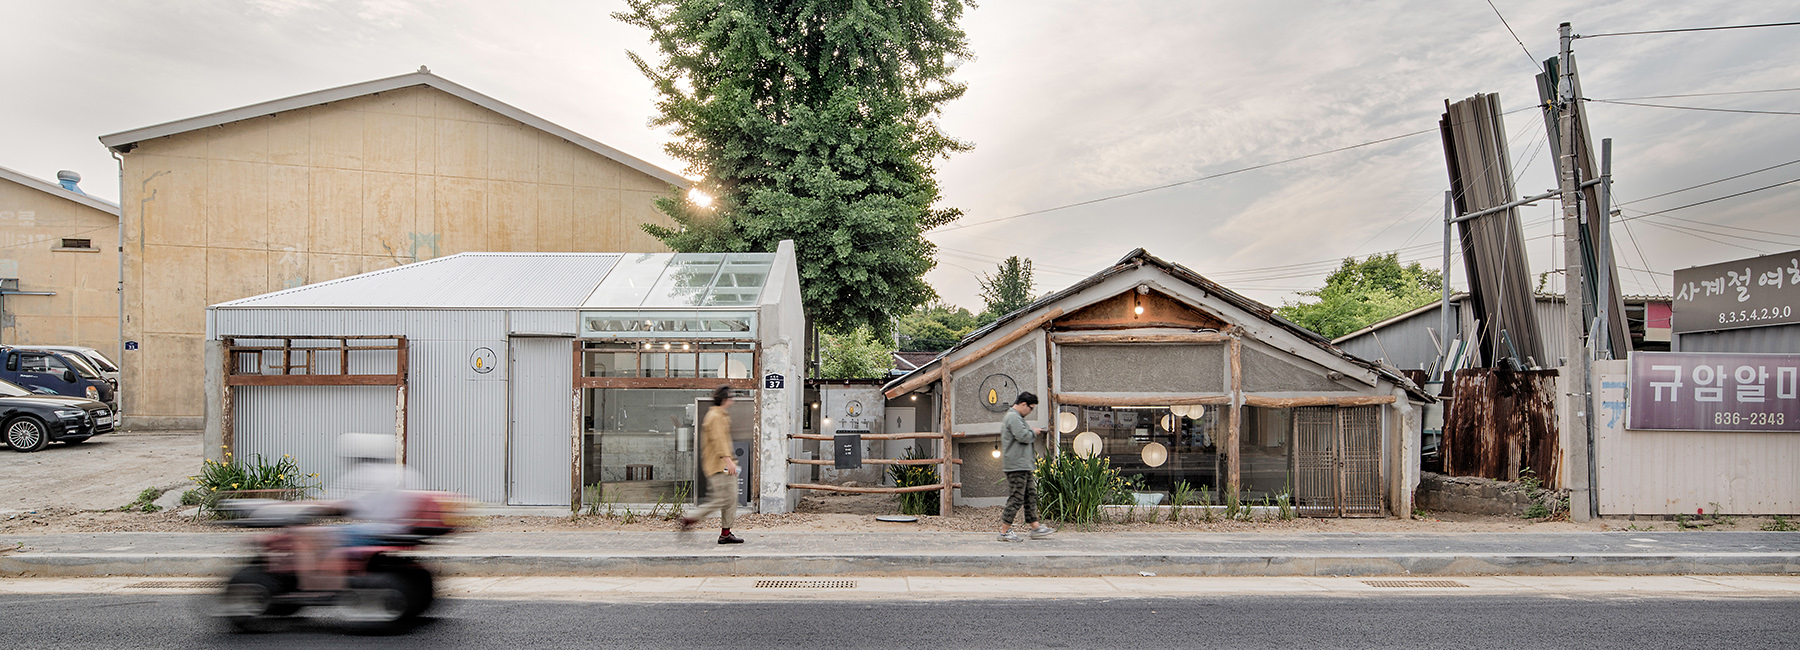 starsis upgrades two 60-year-old barns into a bar and cafe in korean suburbs